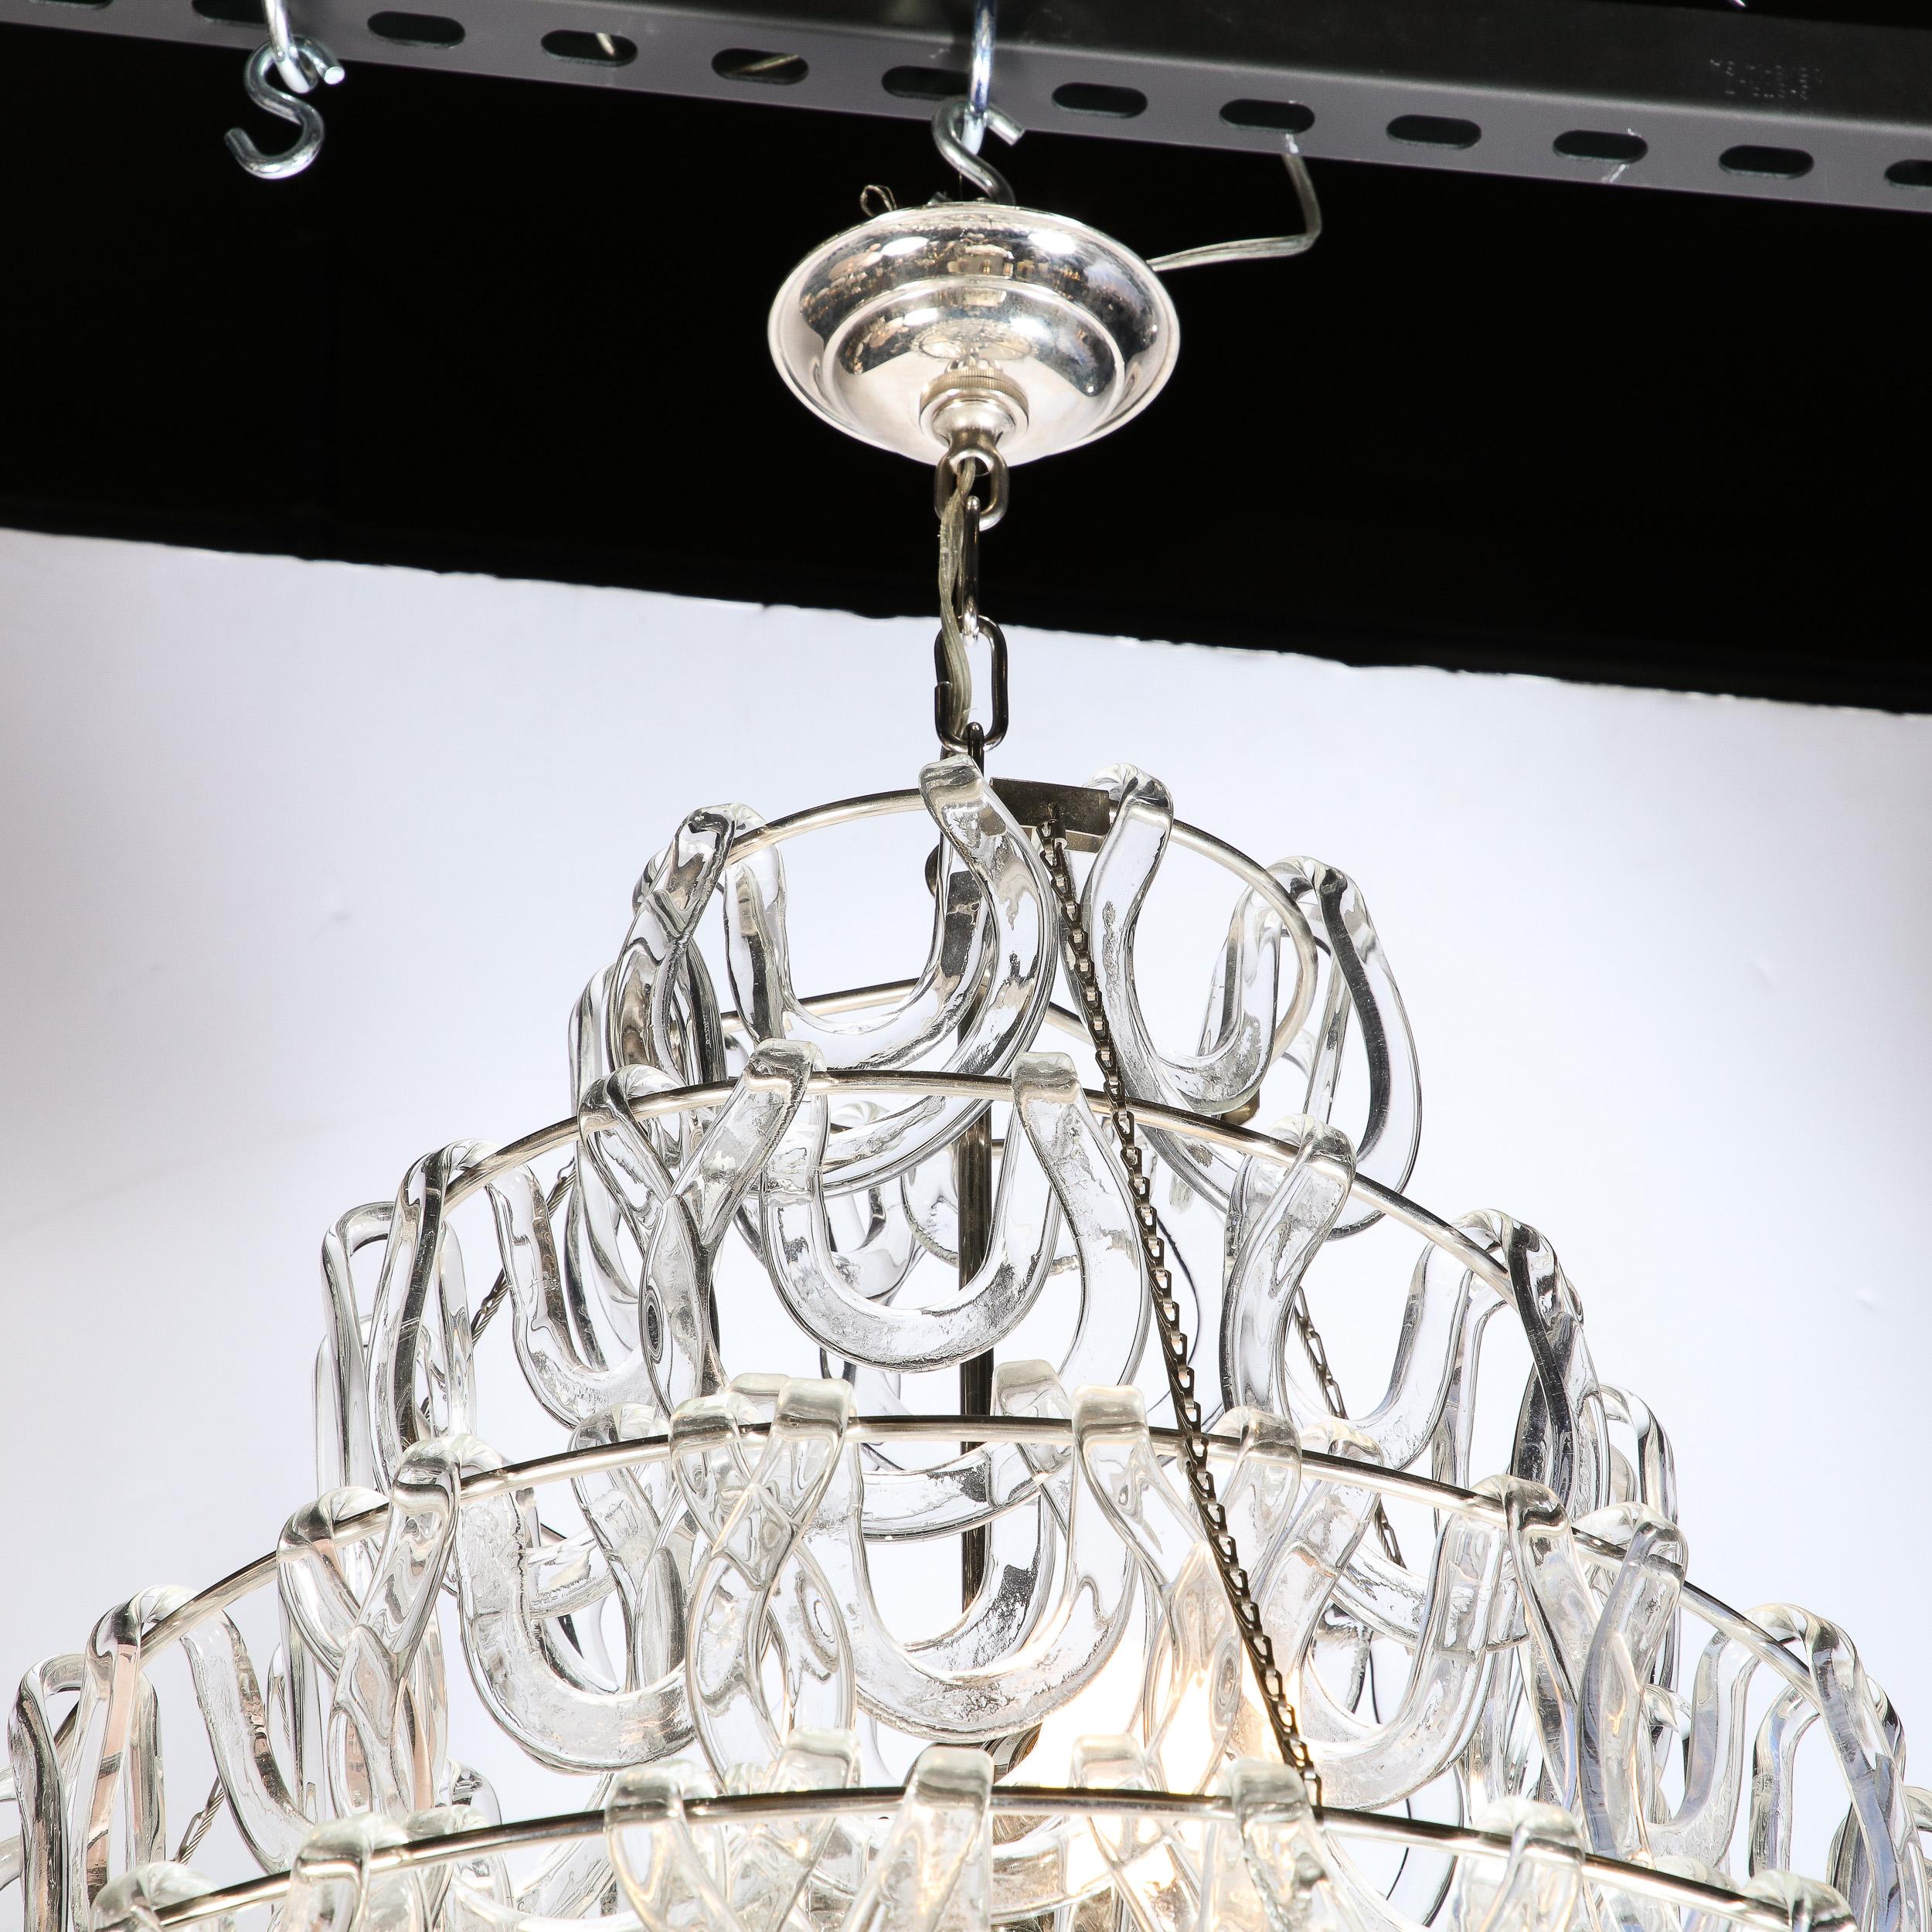 Handblown Murano Glass Giogali 'Link' Chandelier by Mangiarotti for Vistosi In Excellent Condition For Sale In New York, NY